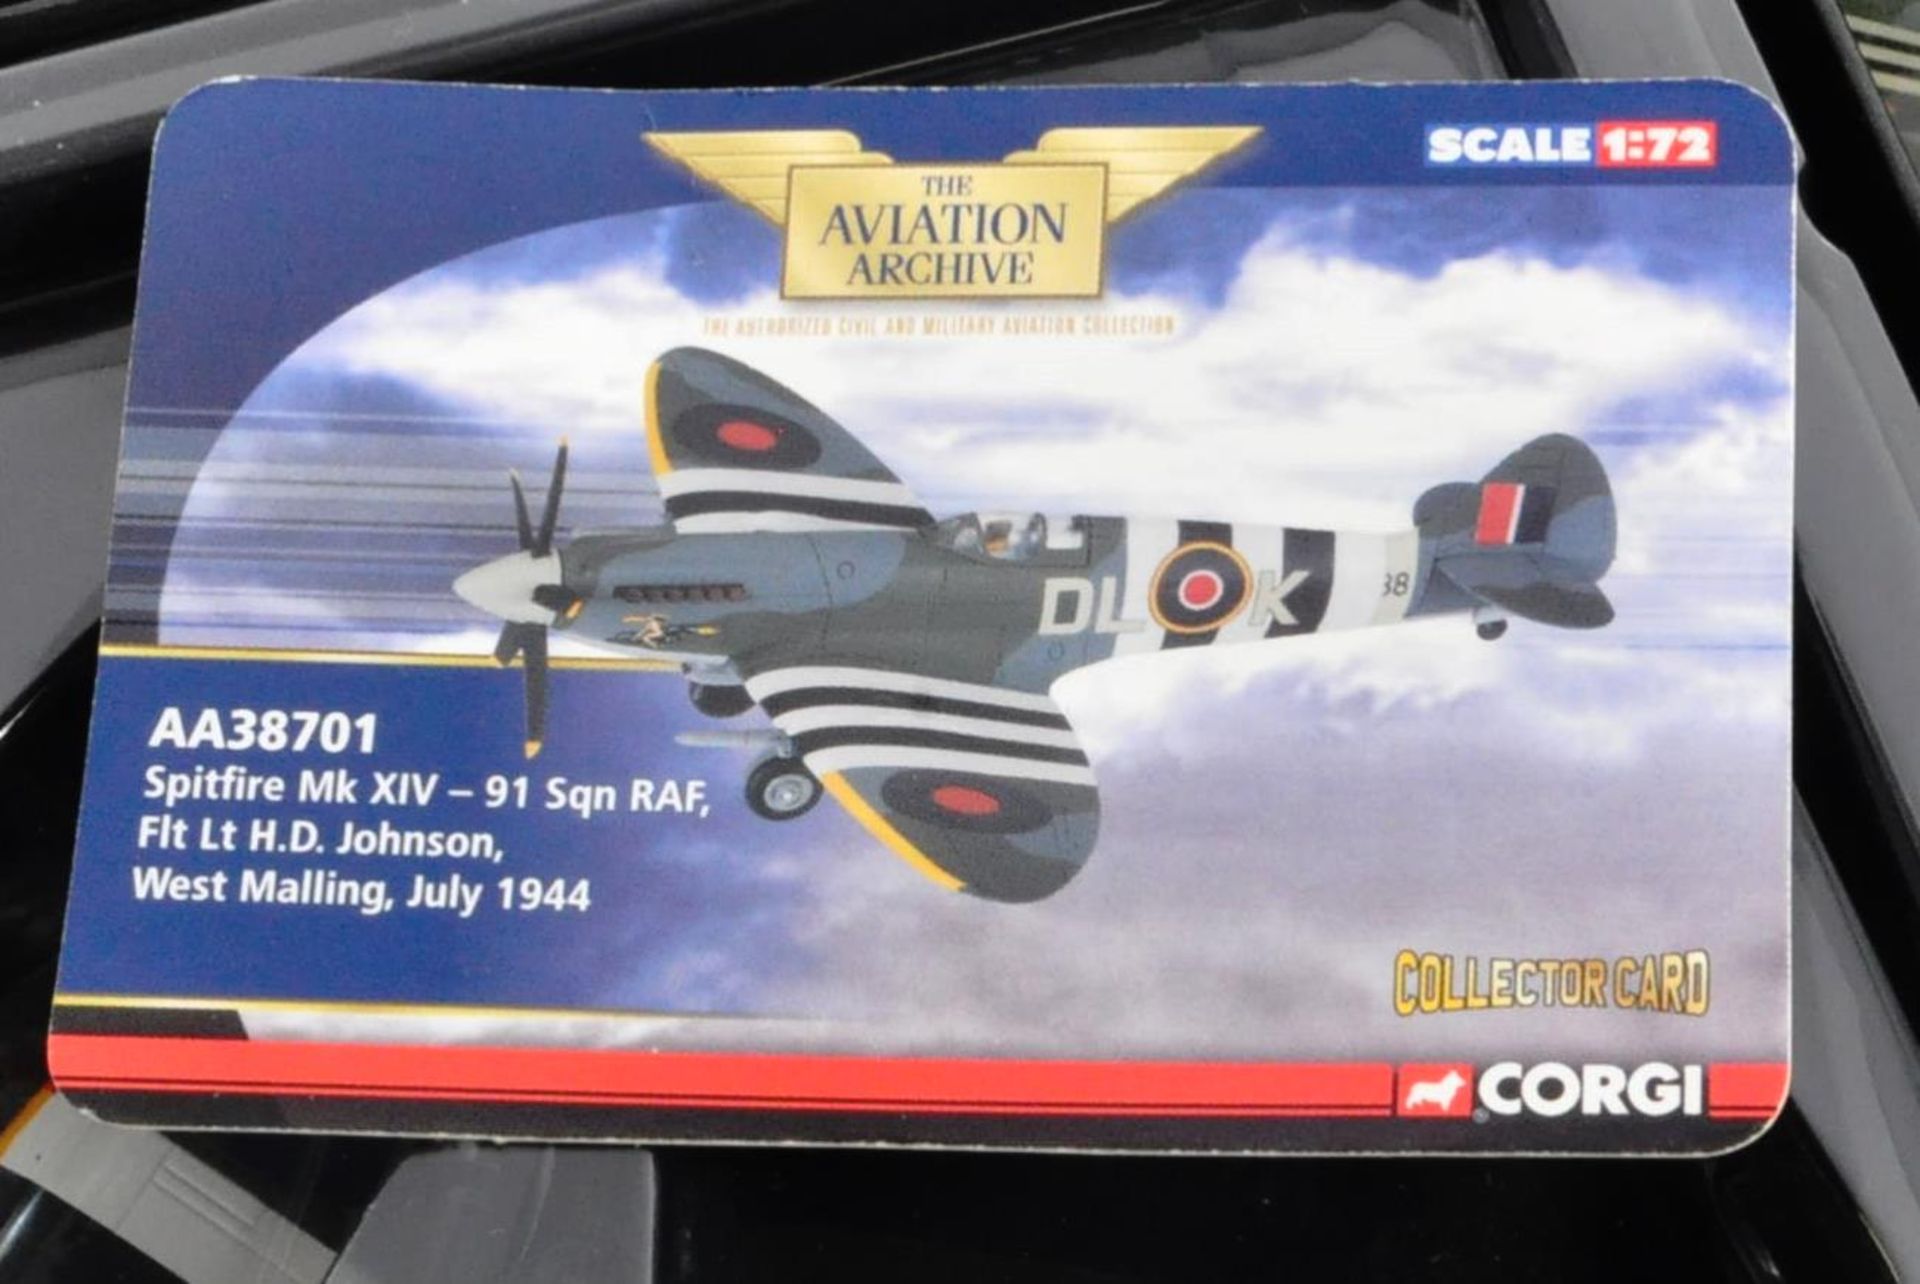 CORGI AVIATION ARCHIVE - TWO BOXED 1/72 & 1/48 SCALE MODELS - Image 2 of 5